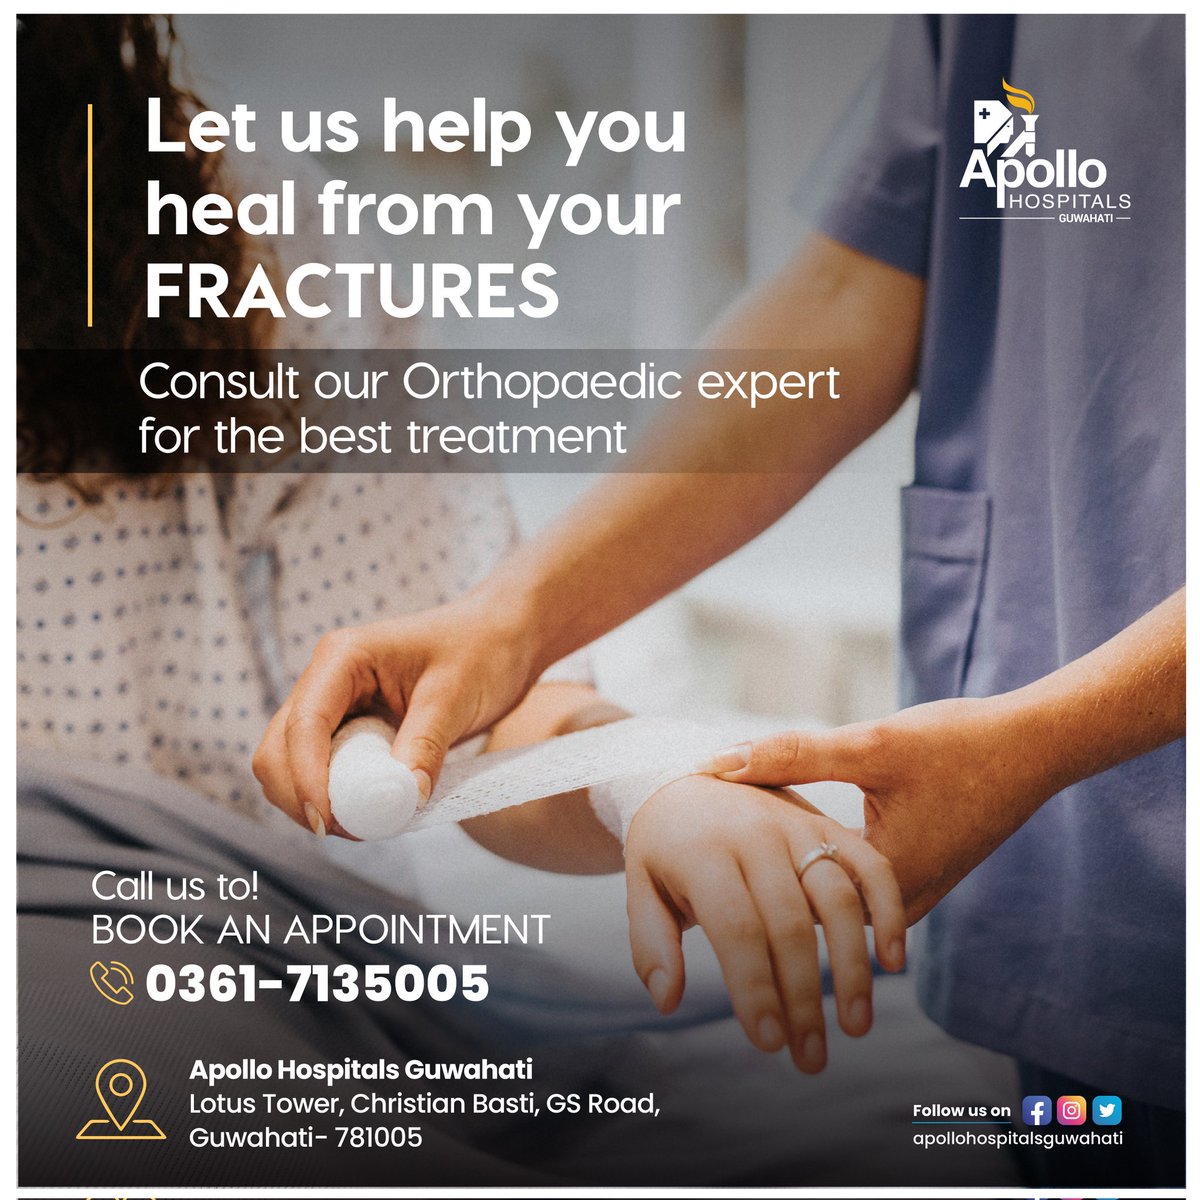 Heal from your painful fractures by our experts at Apollo Hospital, Guwahati.
For more information on health checkups and treatment at Apollo Hospital Guwahati or to seek an appointment, call 0361-7135005.
#apollodoctors #apollohospitalguwahati #orthopaedics #fracturehealing